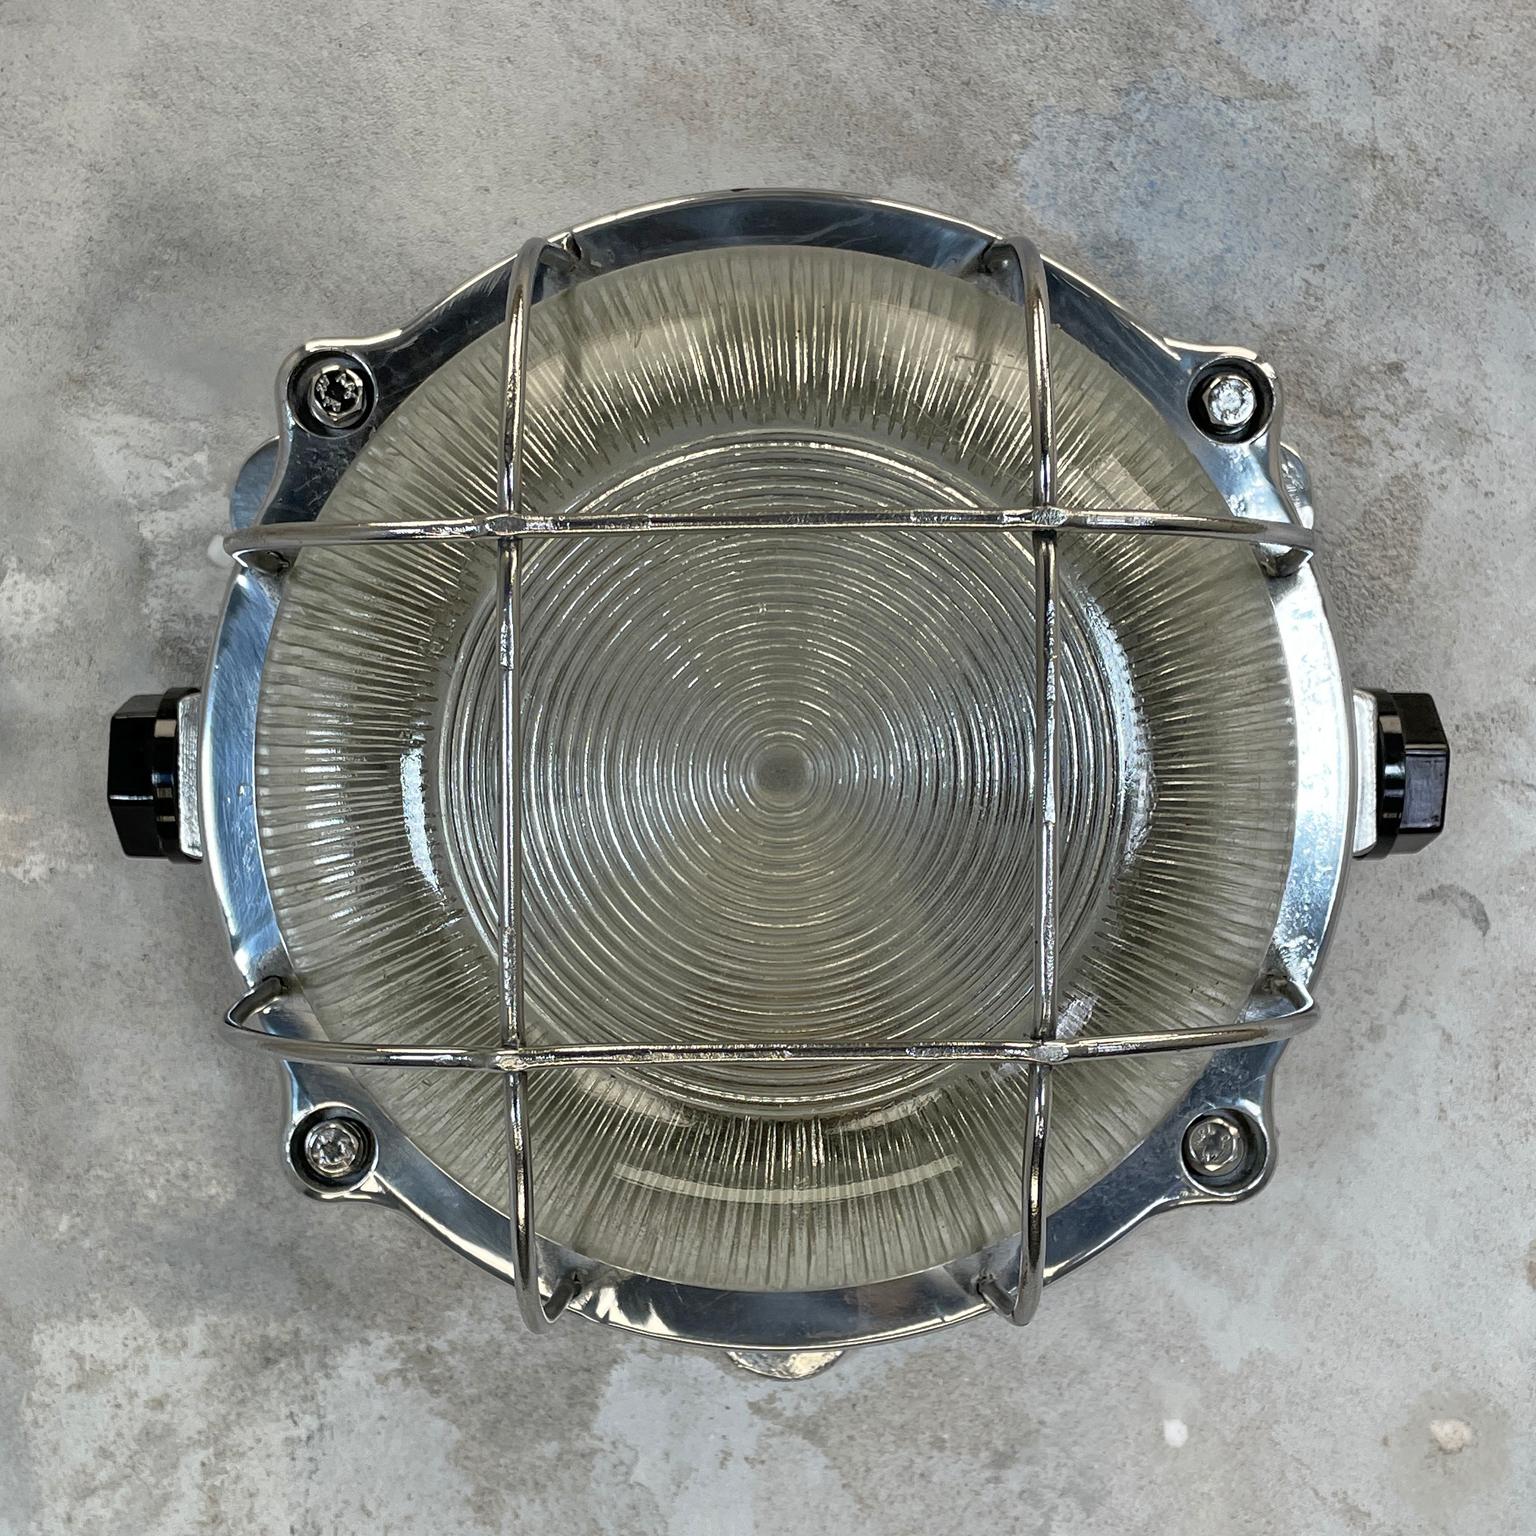 Vintage industrial aluminium outdoor circular bulkhead wall lighting with a chrome cage and prismatic / reeded glass to soften the illumination. Perfect robust and stylish outdoor light fixtures.

Specifications
Diameter: 25cm
Depth: